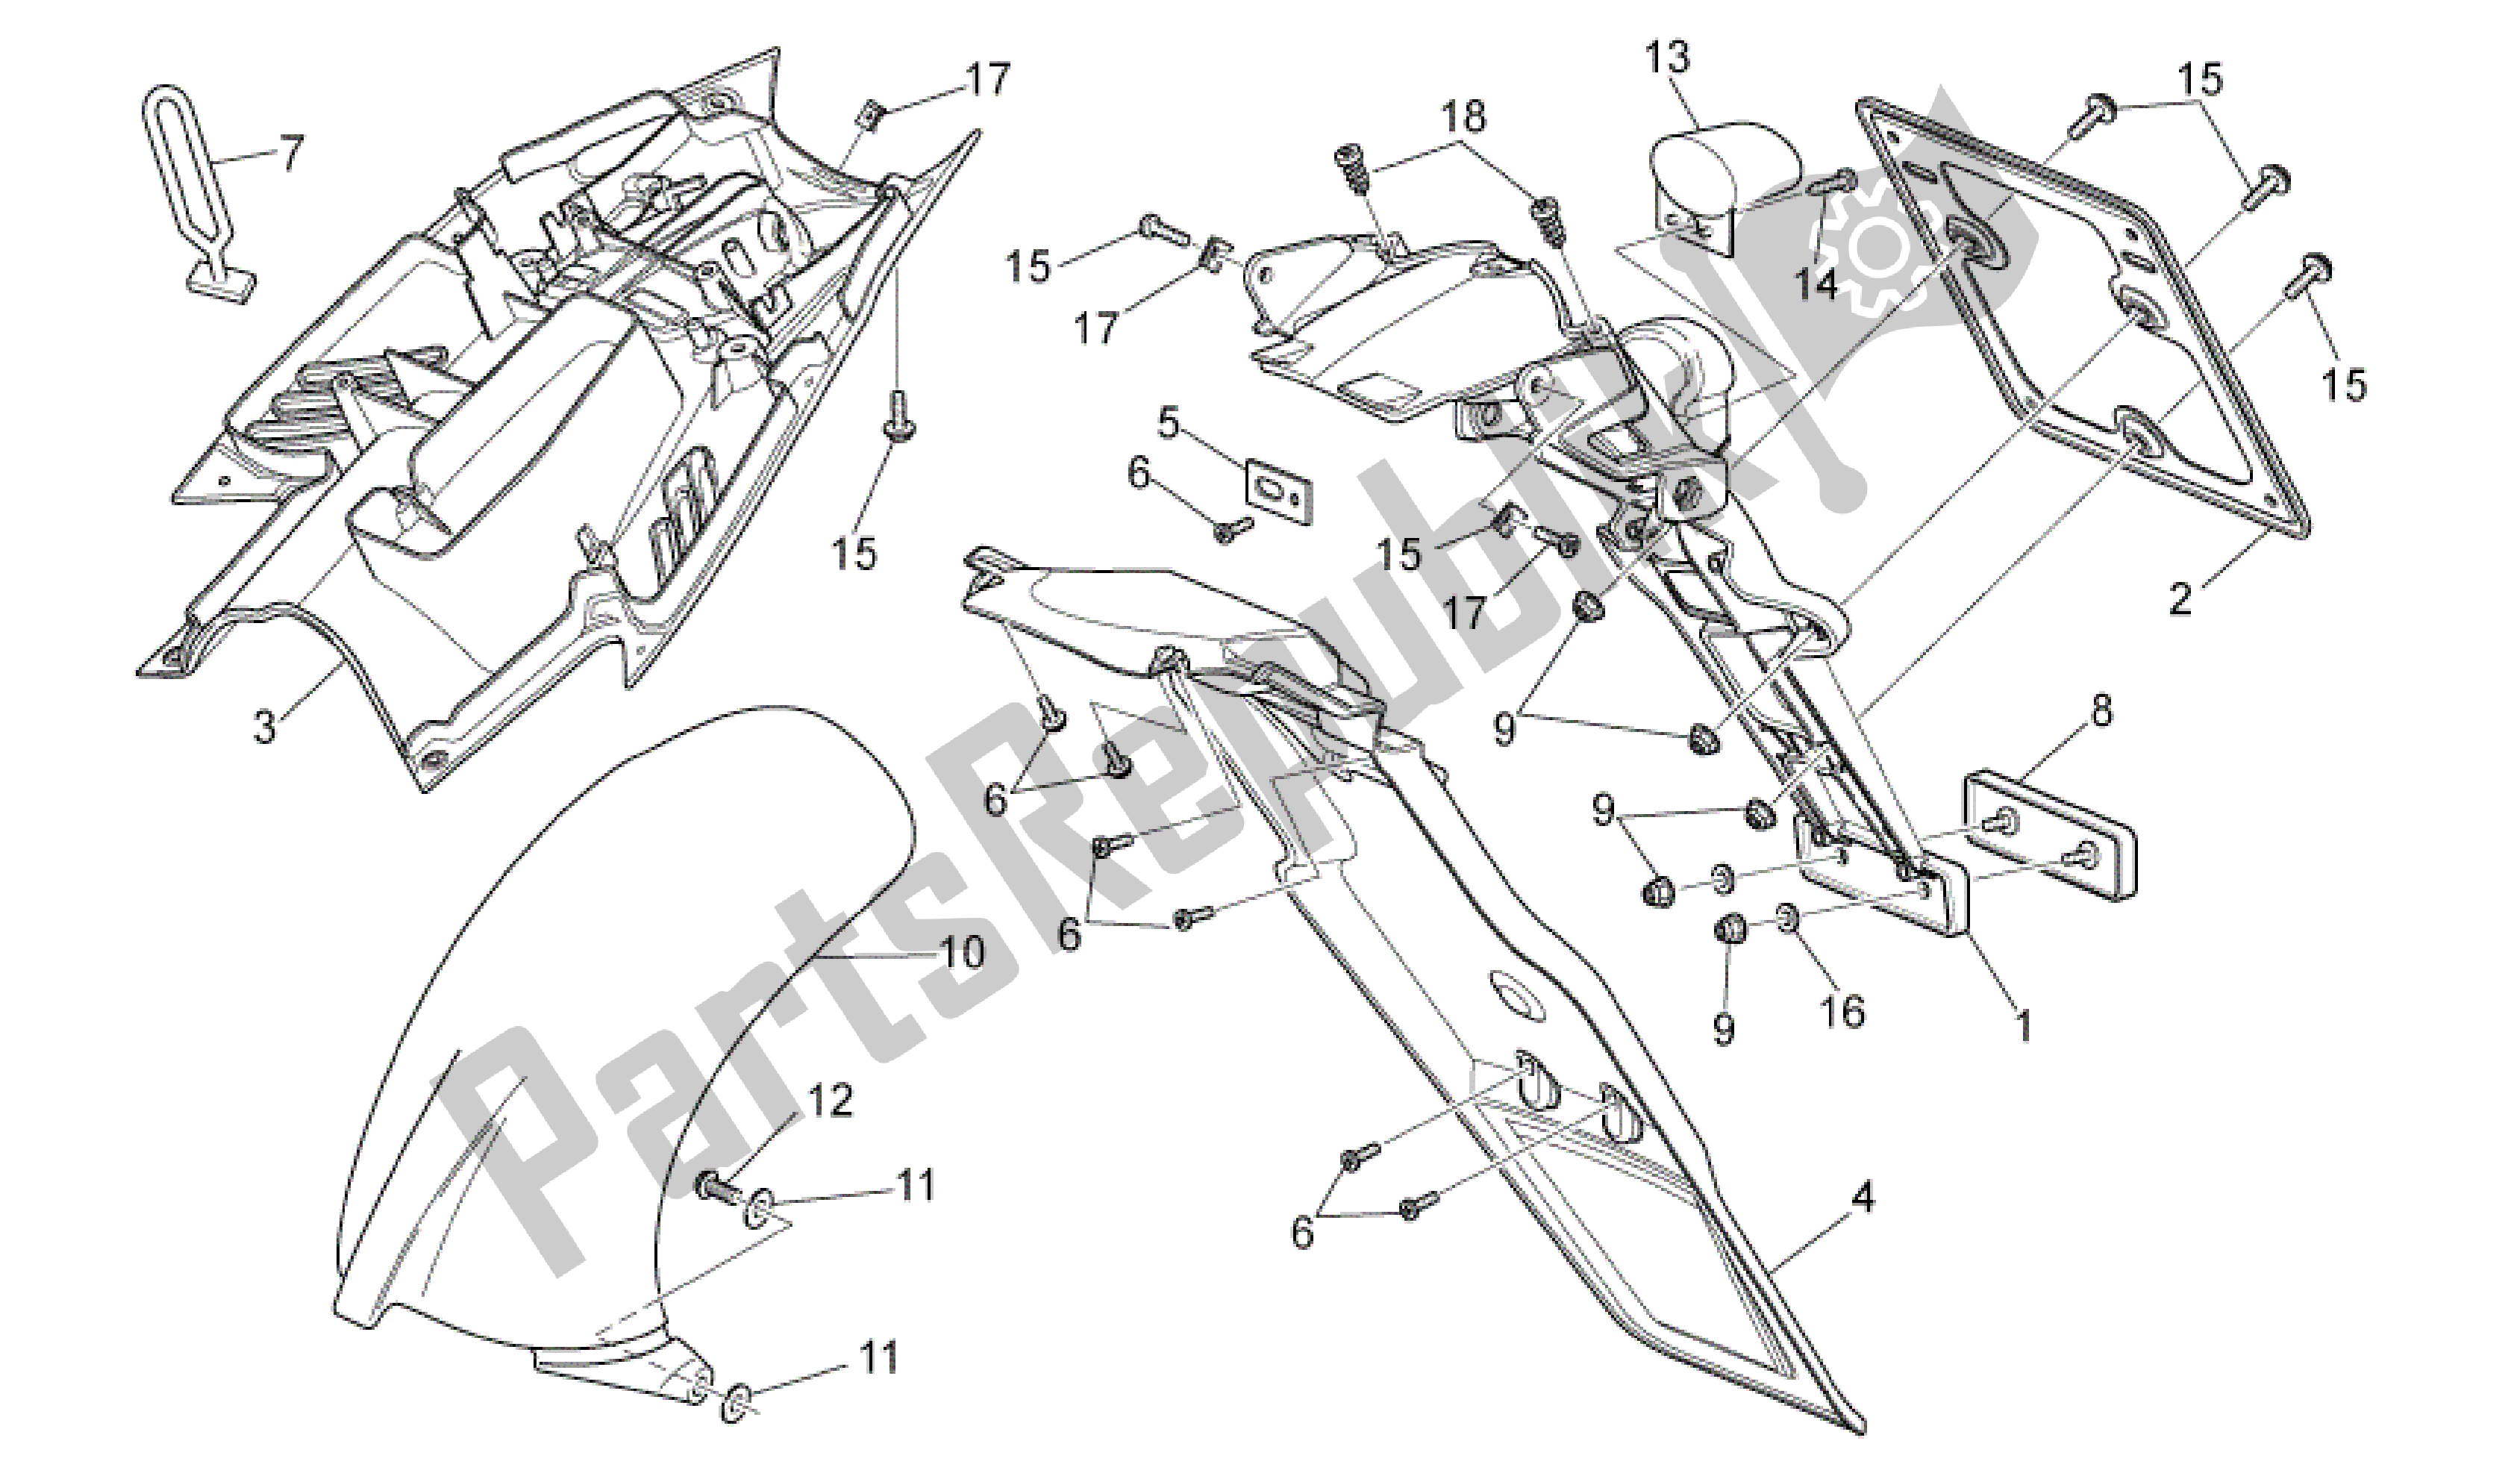 All parts for the Carrocería Trasera Ii of the Aprilia RS 125 2006 - 2010